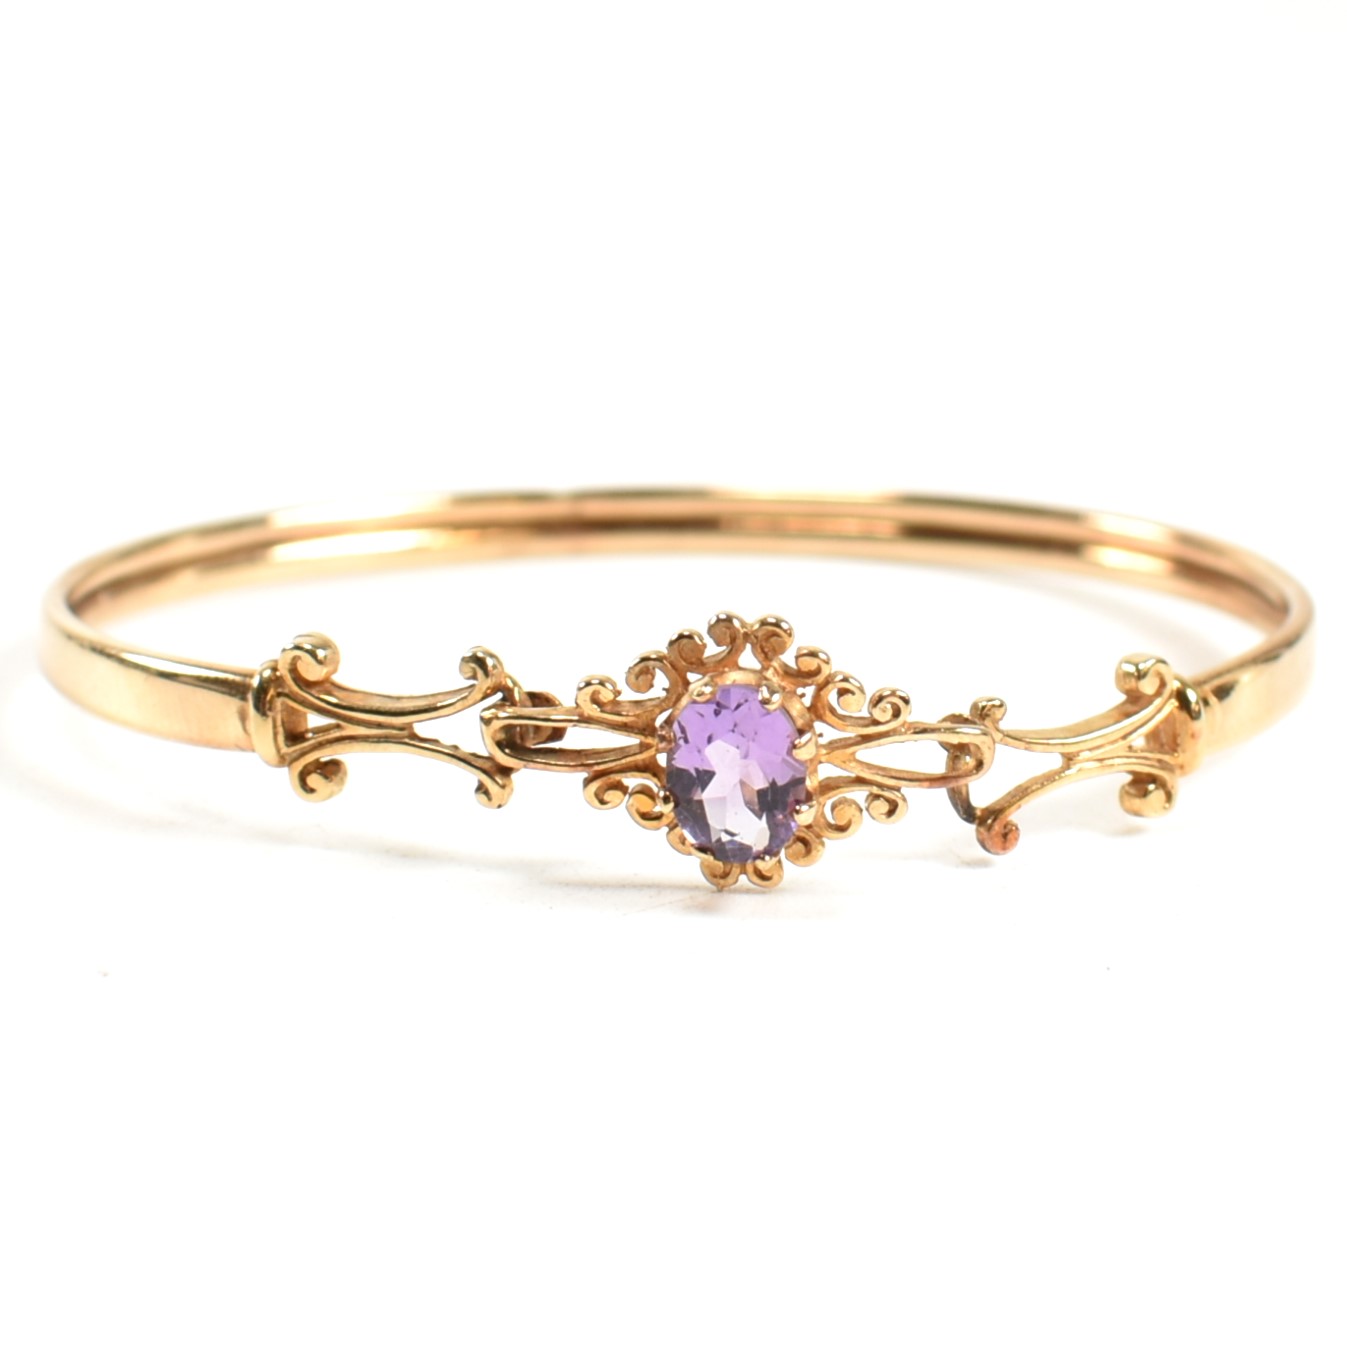 VICTORIAN STYLE HALLMARKED 9CT GOLD & AMETHYST BANGLE & EARRING SET - Image 3 of 14